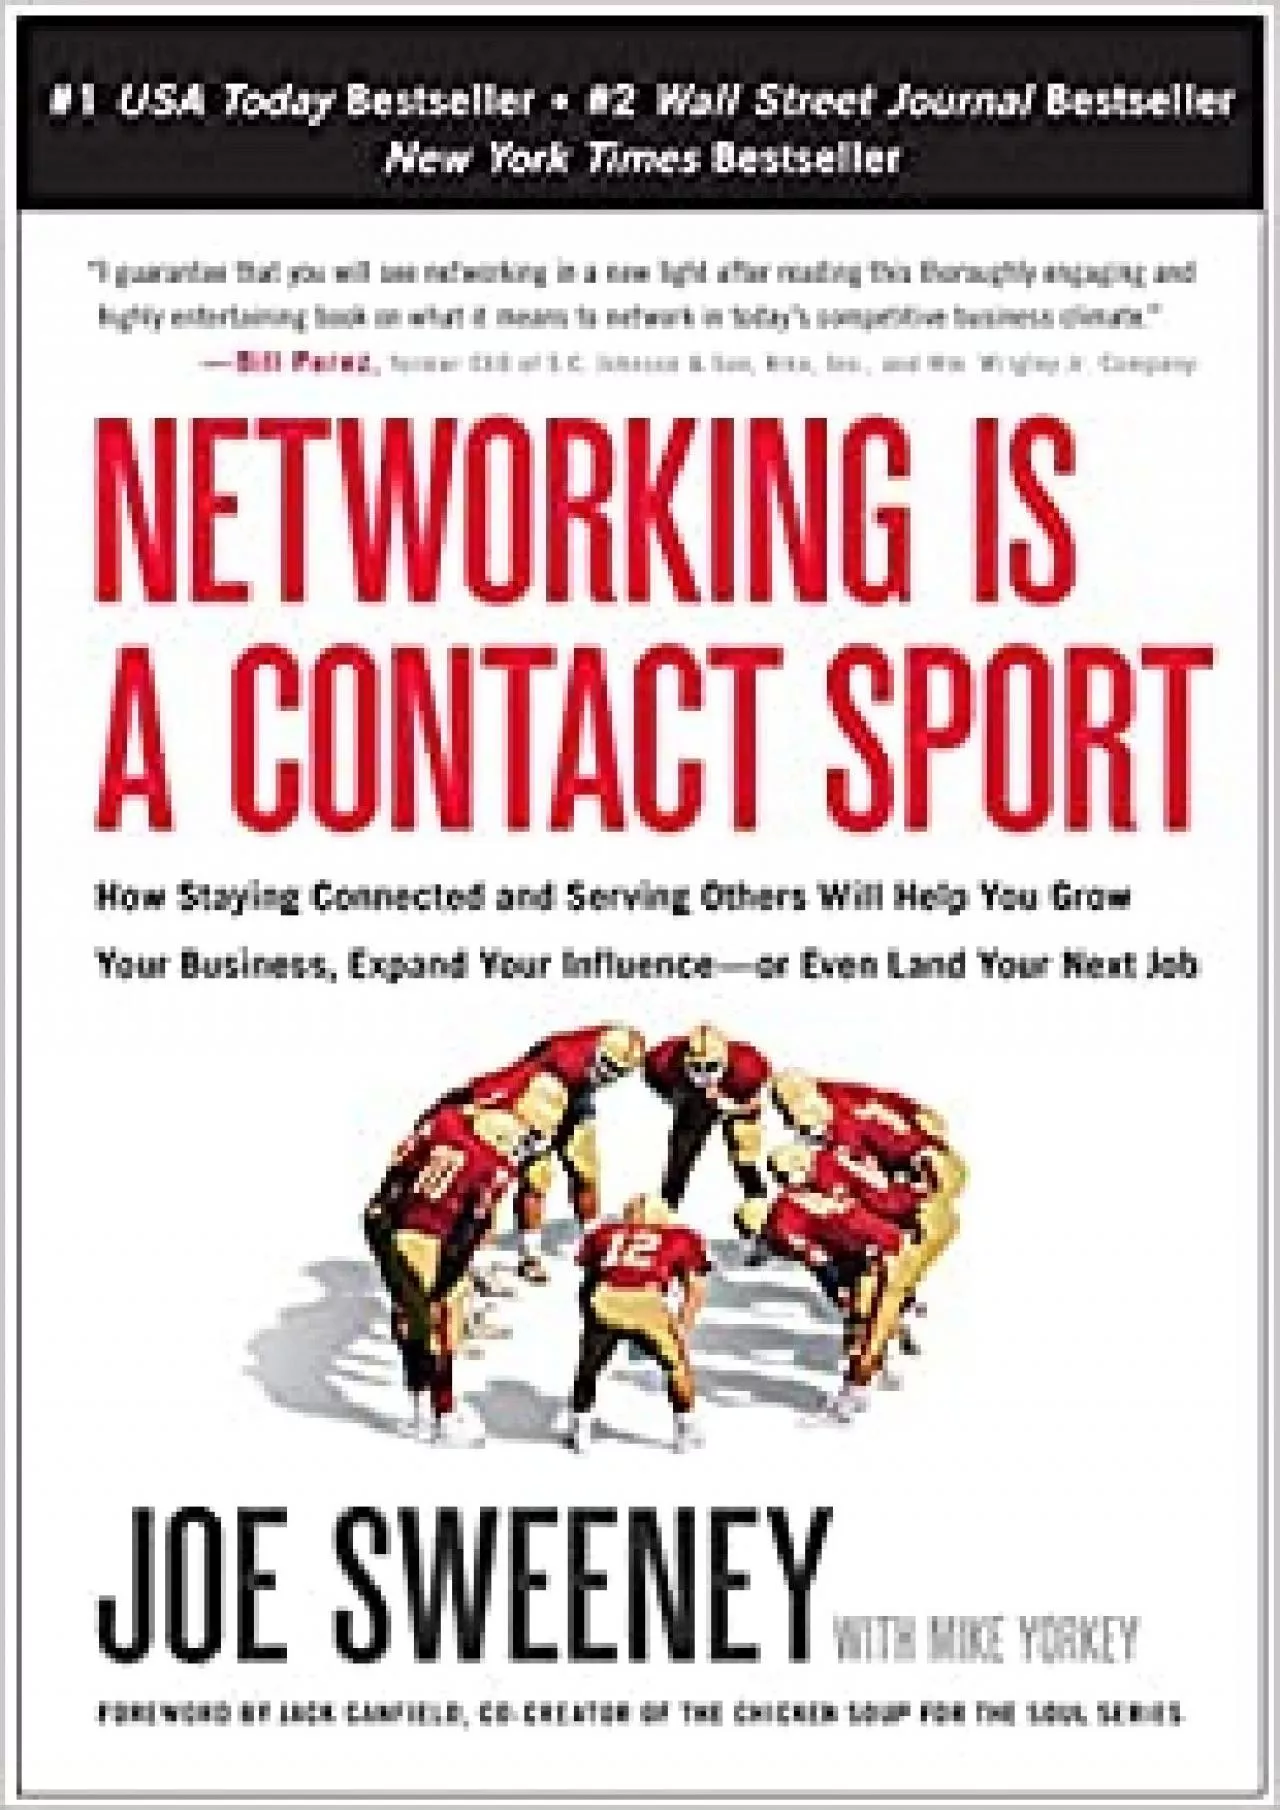 Networking is a Contact Sport How Staying Connected and Serving Others Will Help You Grow